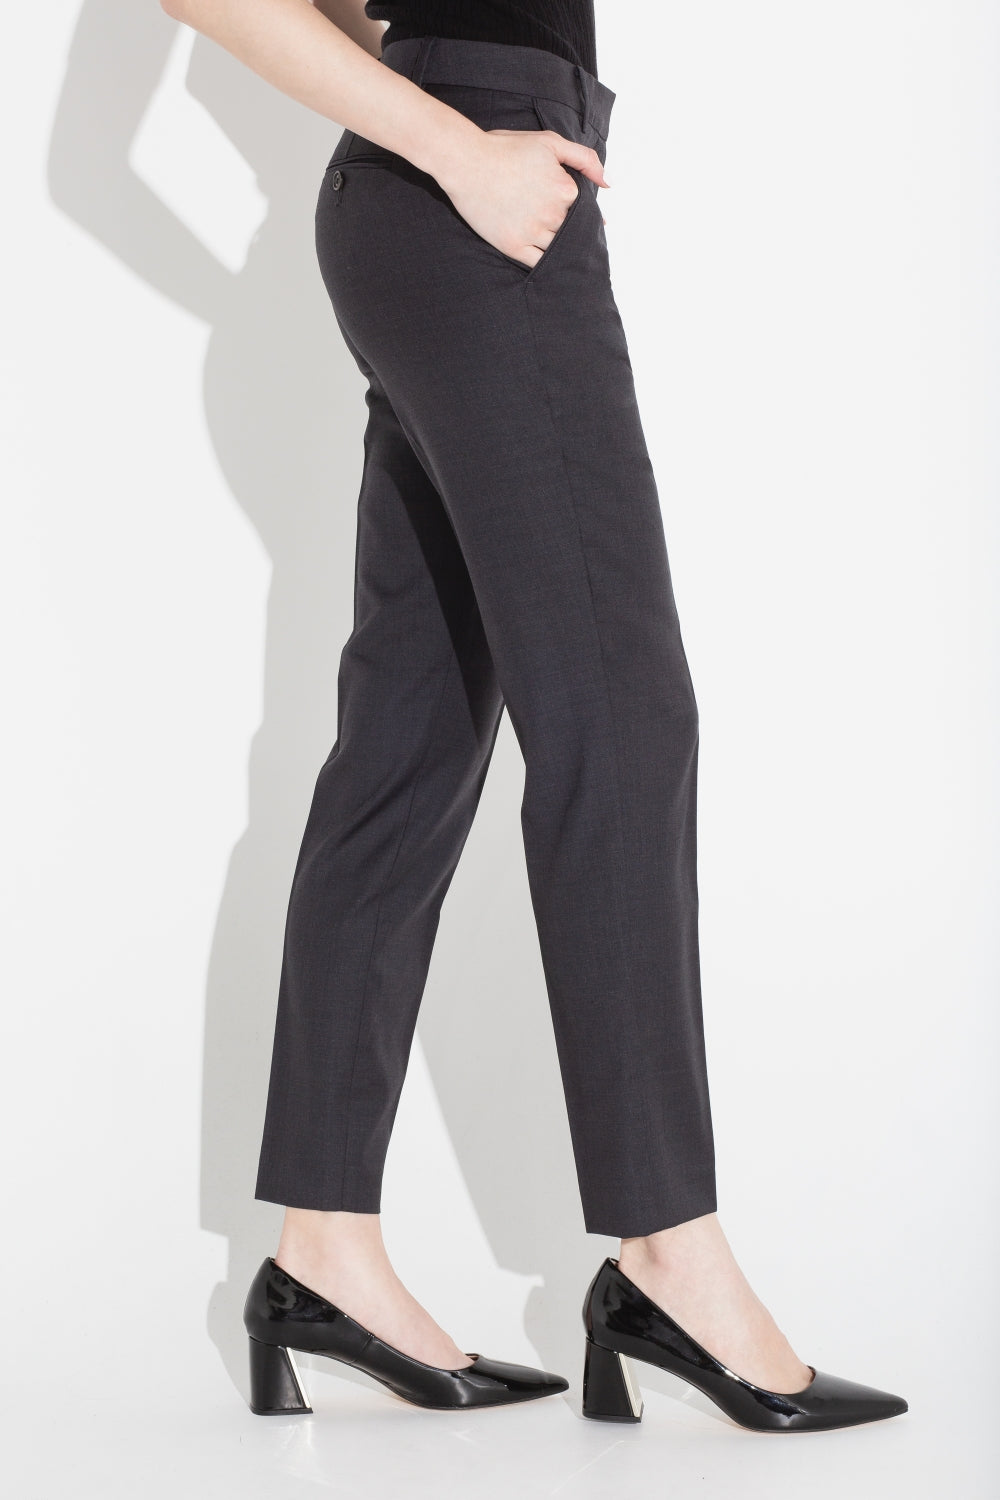 Tailored Trouser - Black Heather (Tall)